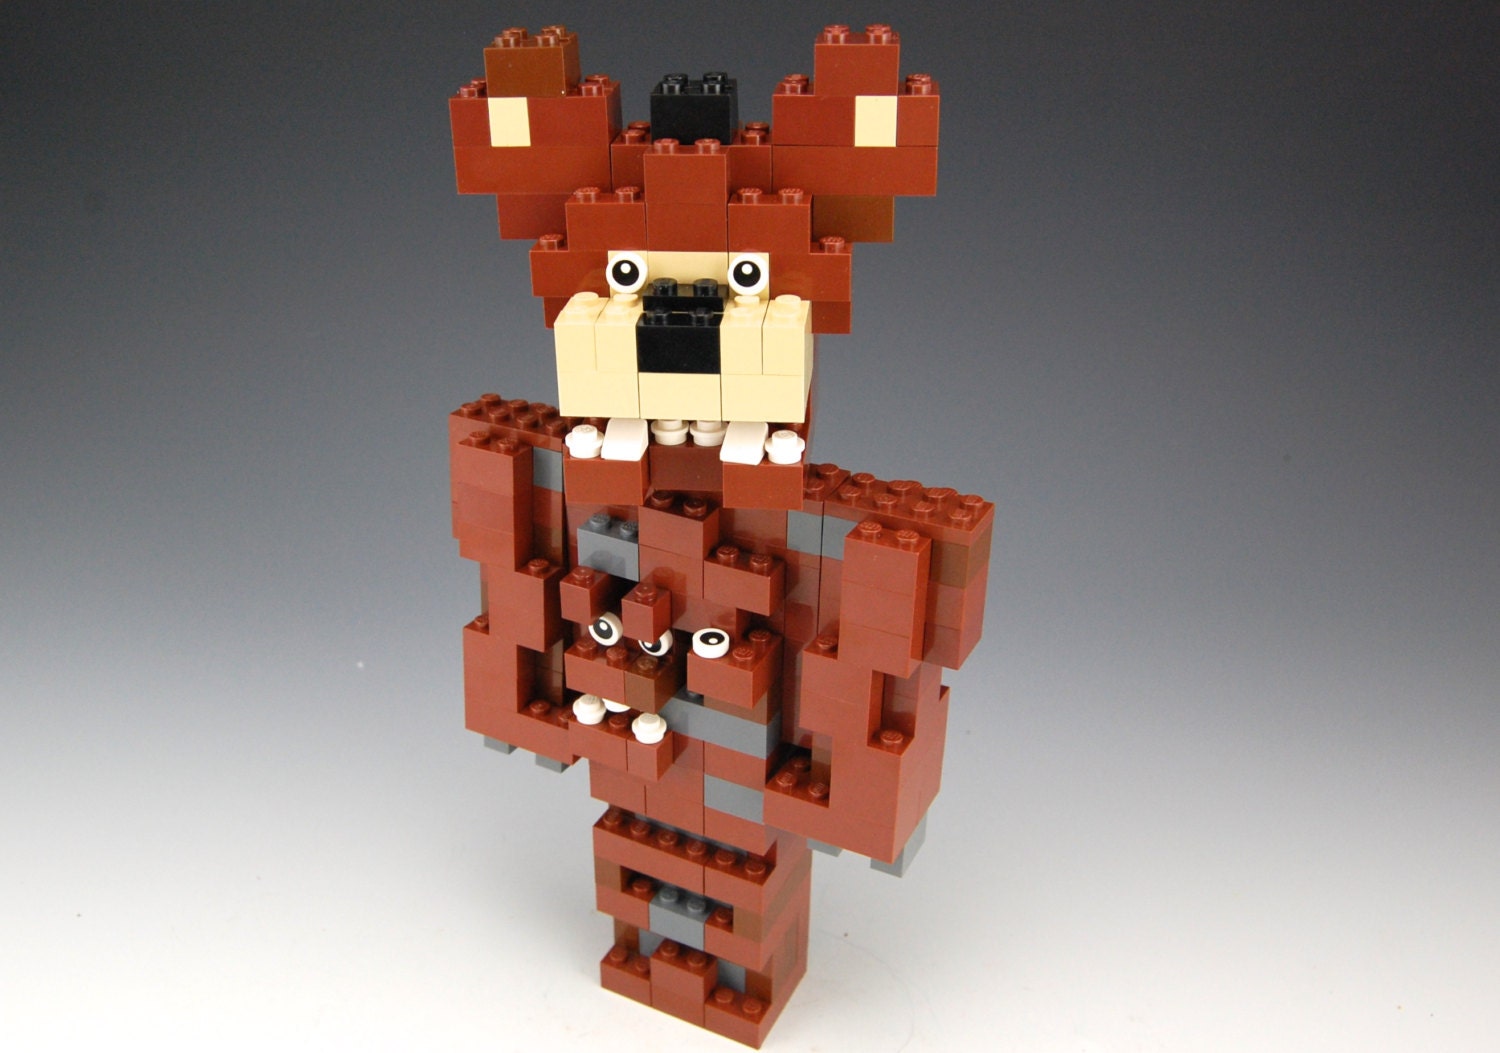 lego five nights at freddys 4 download